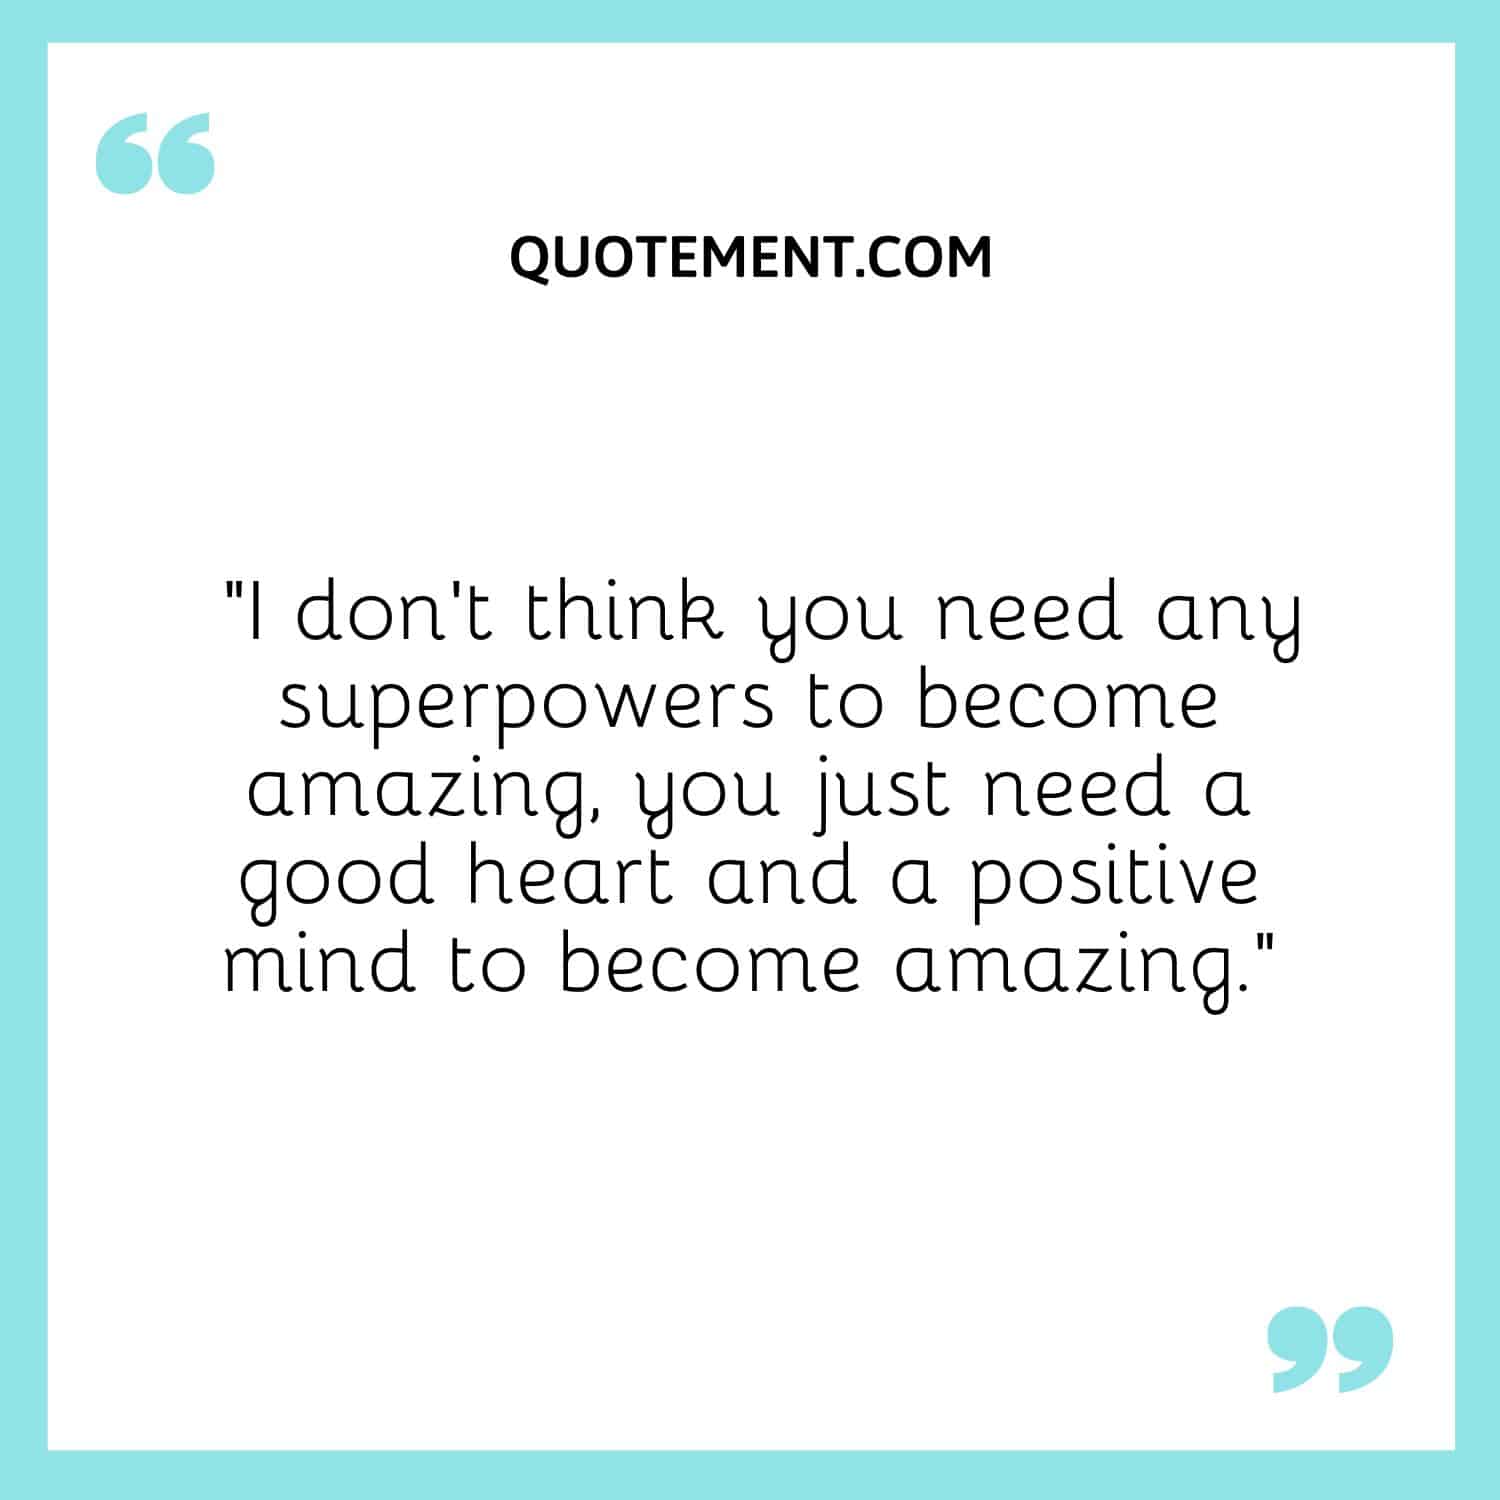 I don’t think you need any superpowers to become amazing, you just need a good heart